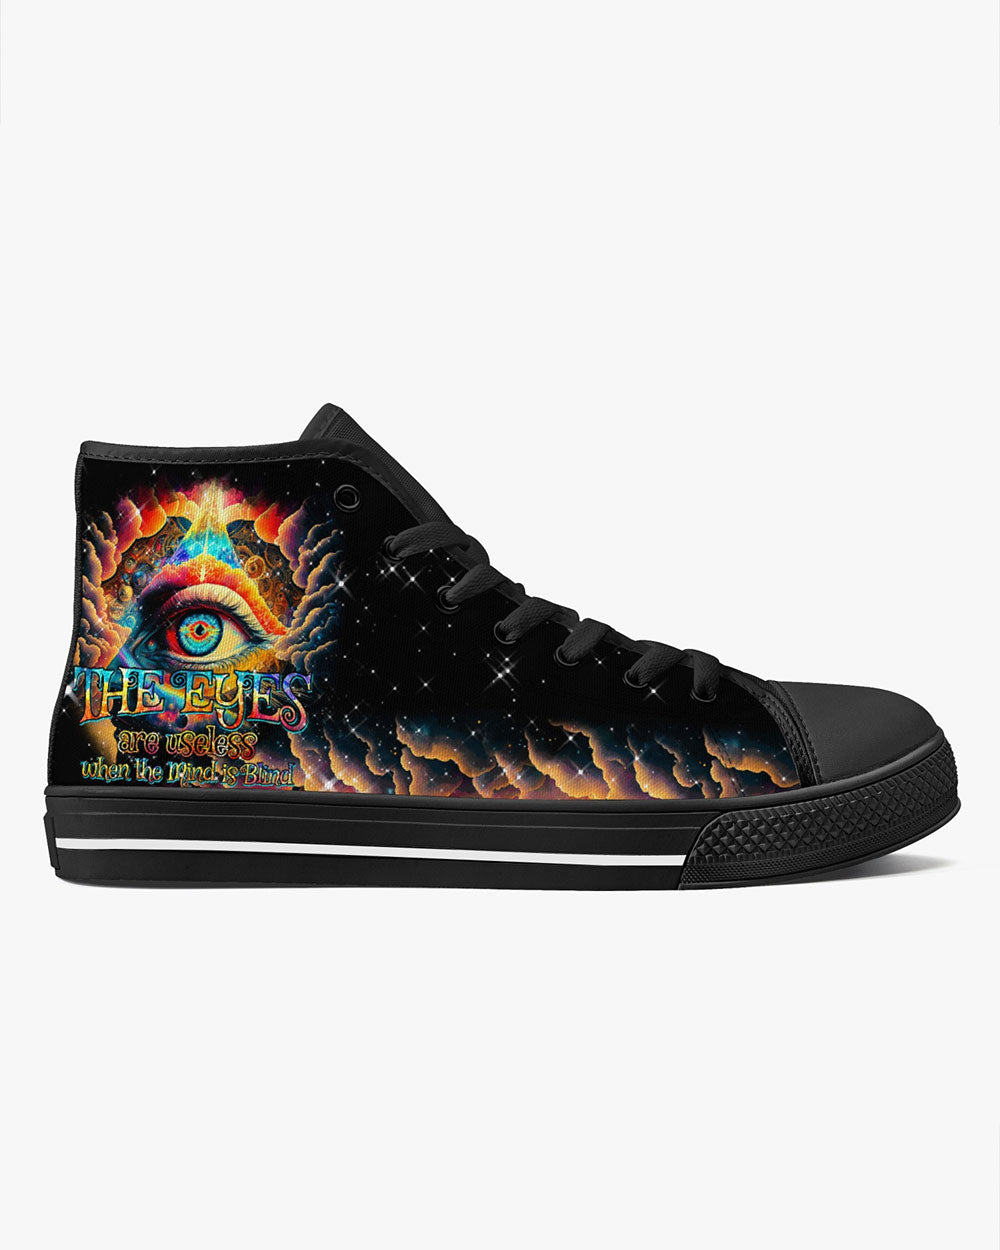 THE EYES ARE USELESS WHEN THE MIND IS BLIND HIGH TOP CANVAS SHOES - TYTM2103234